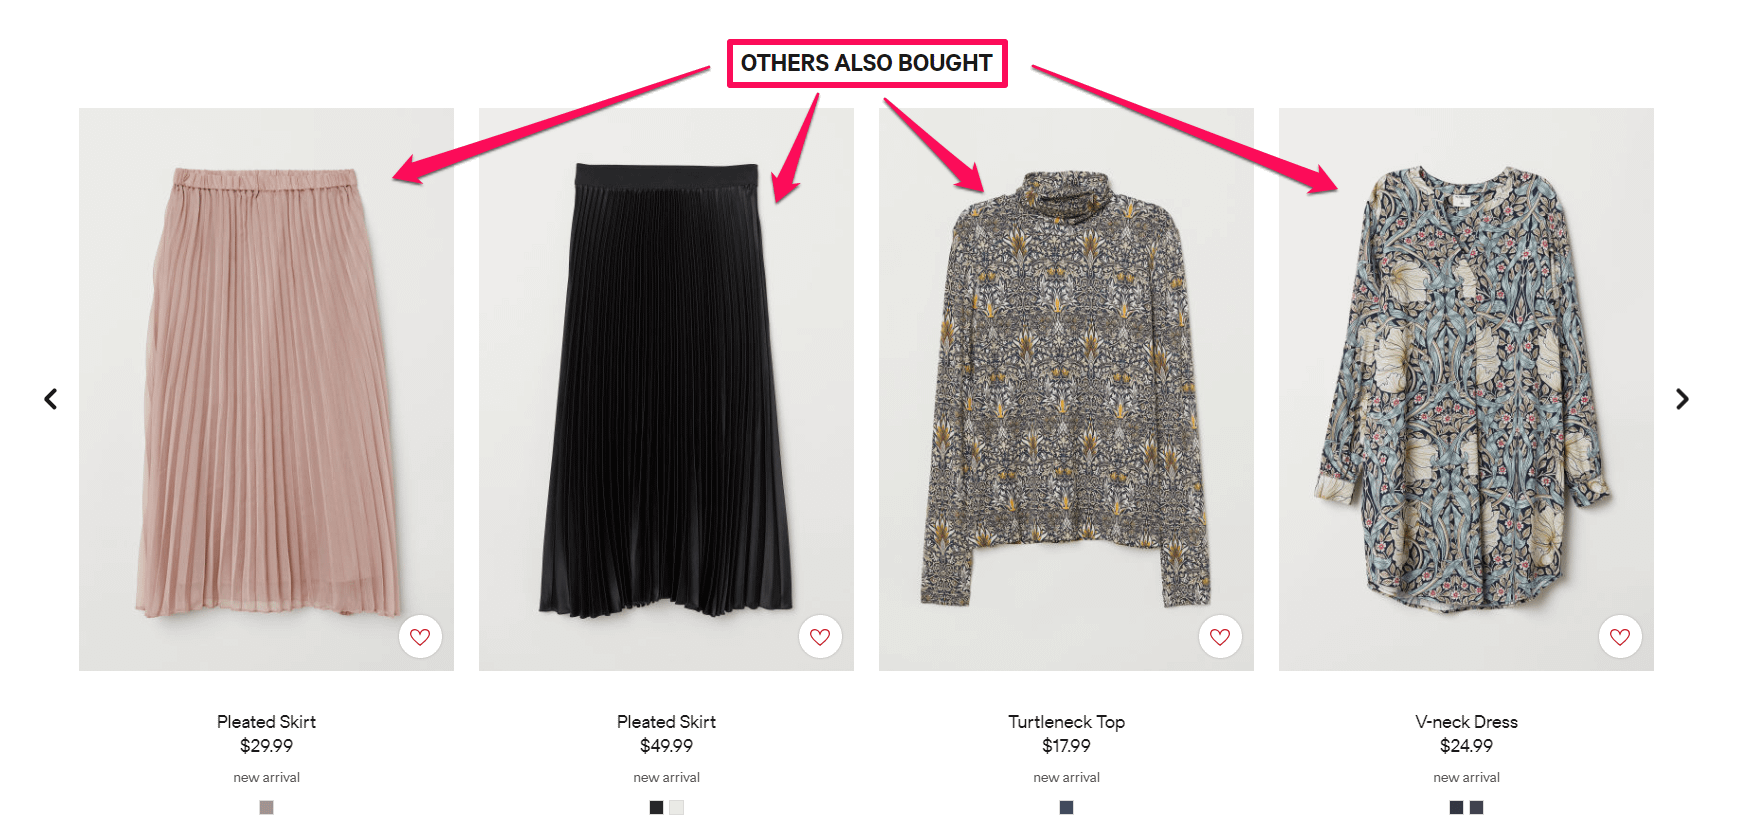 collaborative filtering example H&M